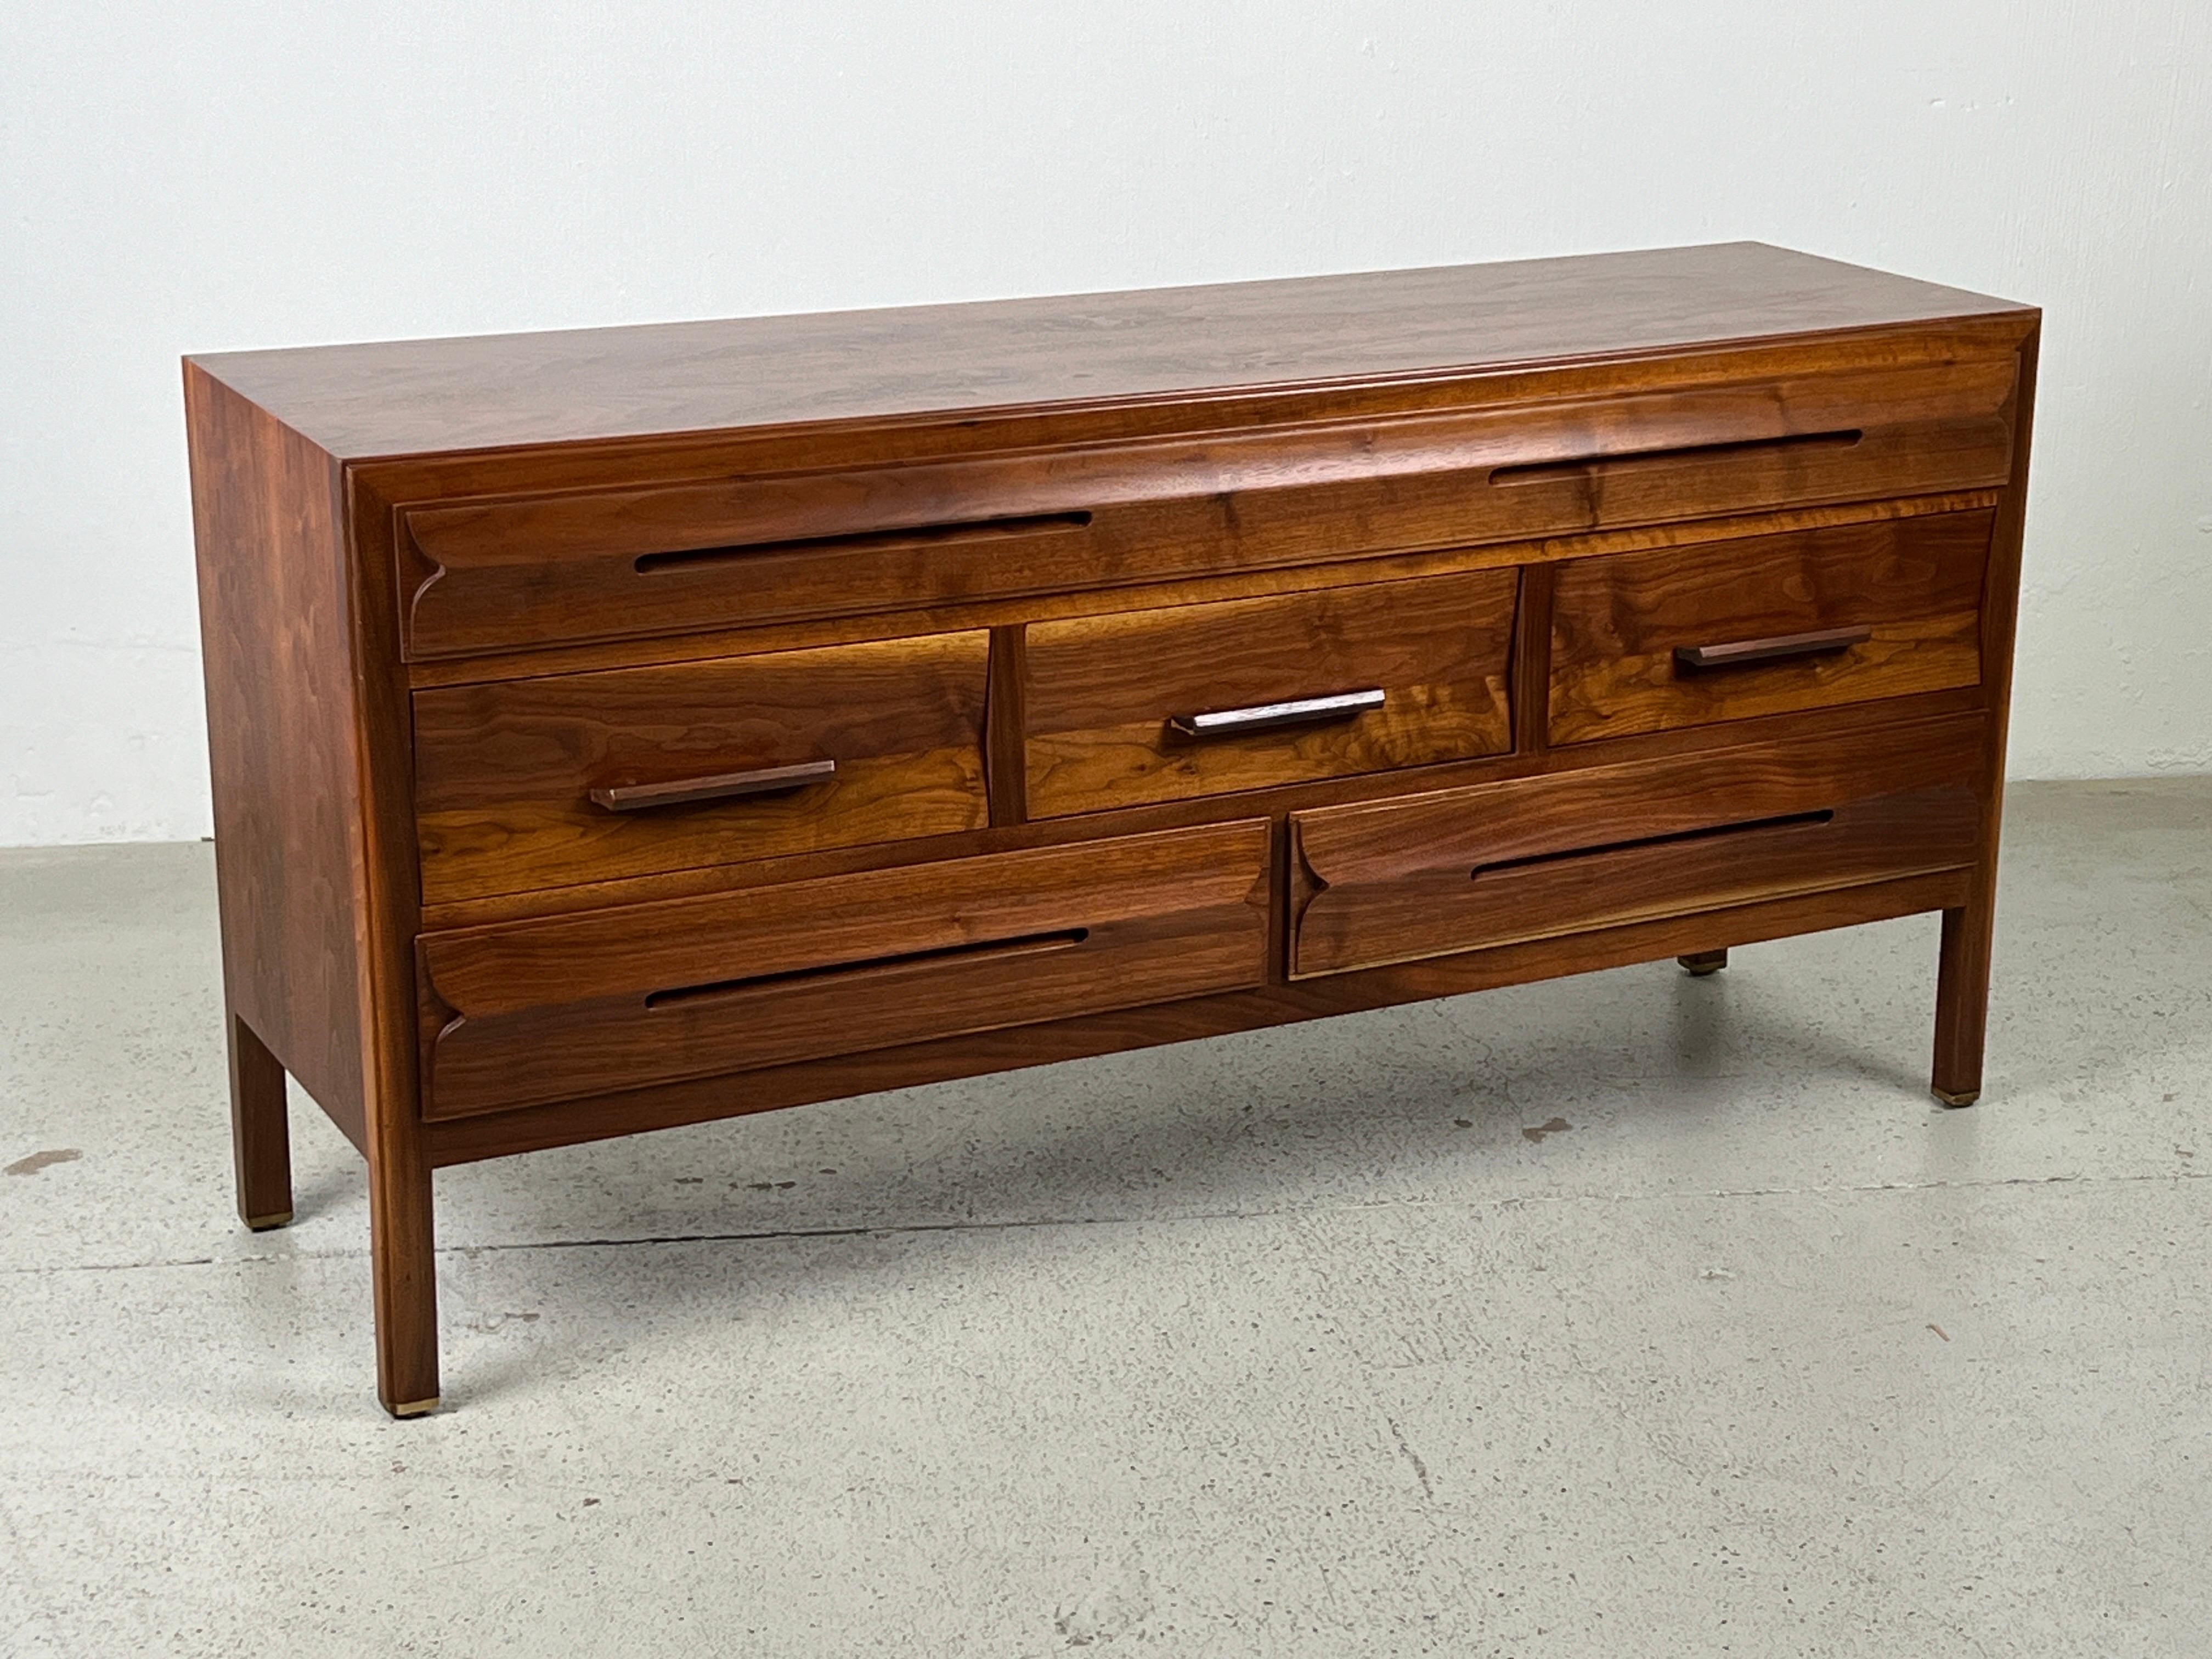 Chest by Edward Wormley for Dunbar For Sale 4